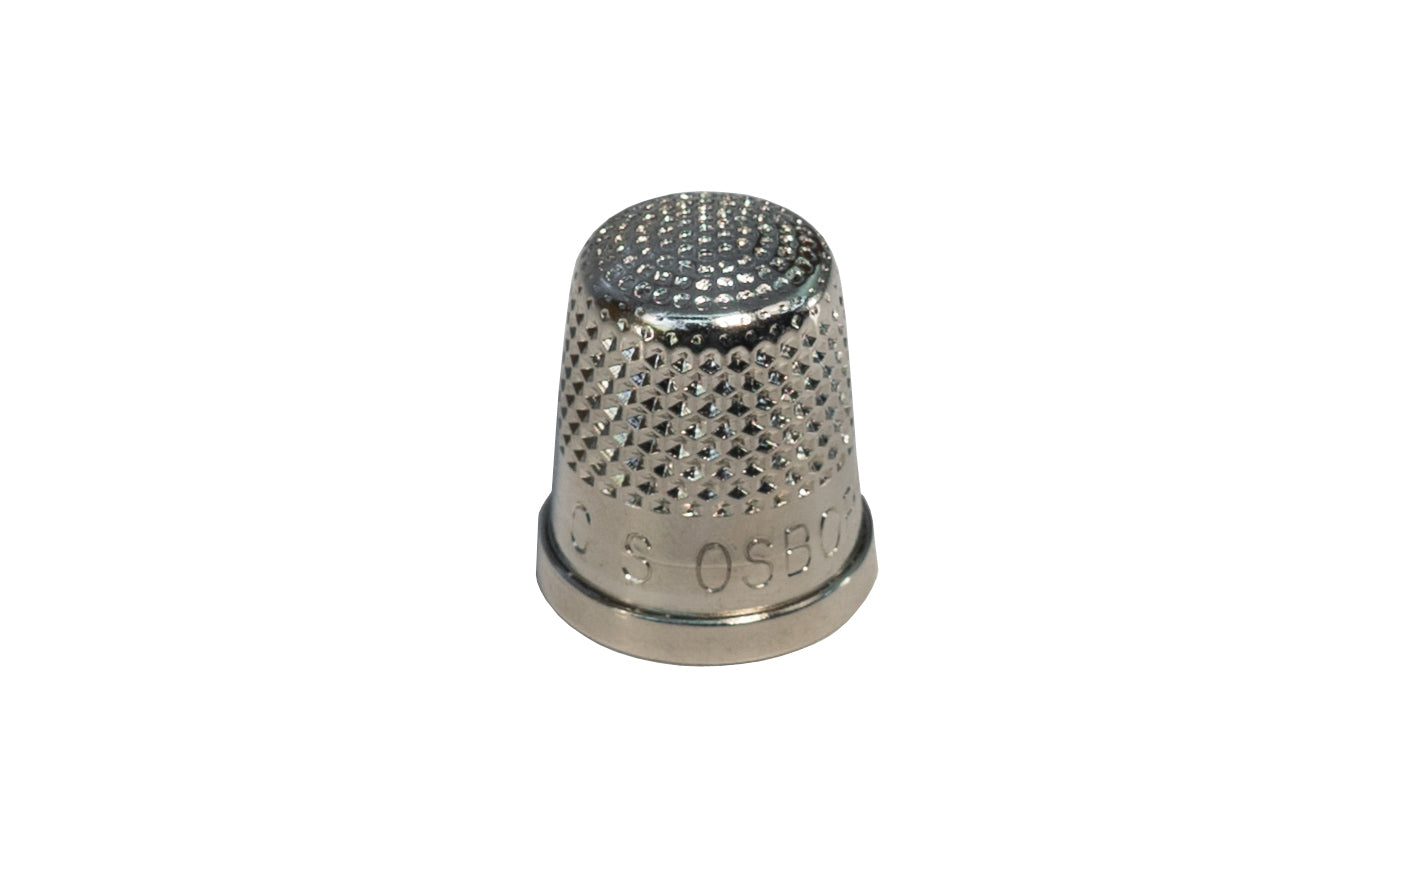 CS Osborne Closed End Thimble ~ No. 511 - Great for working with canvas & leather materials - Brass Material - Nickel Plated